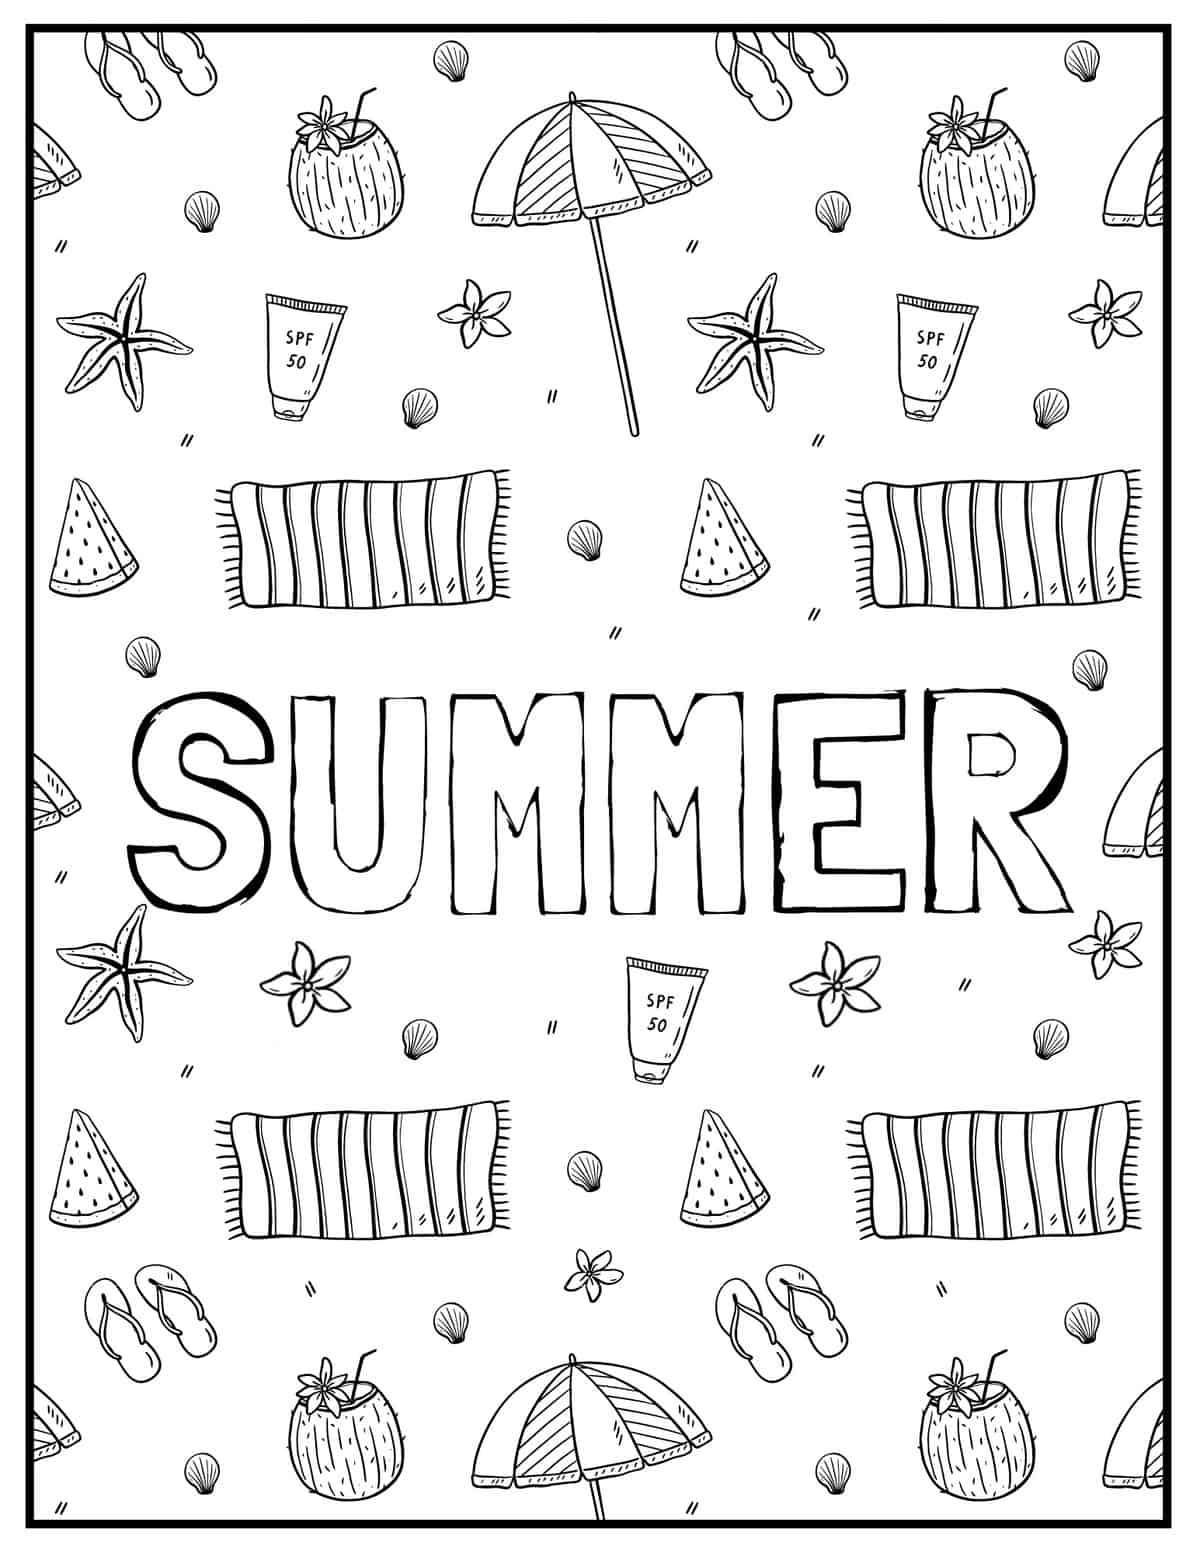 summer beach background coloring page with beach towels, flip flops, umbrellas, shells